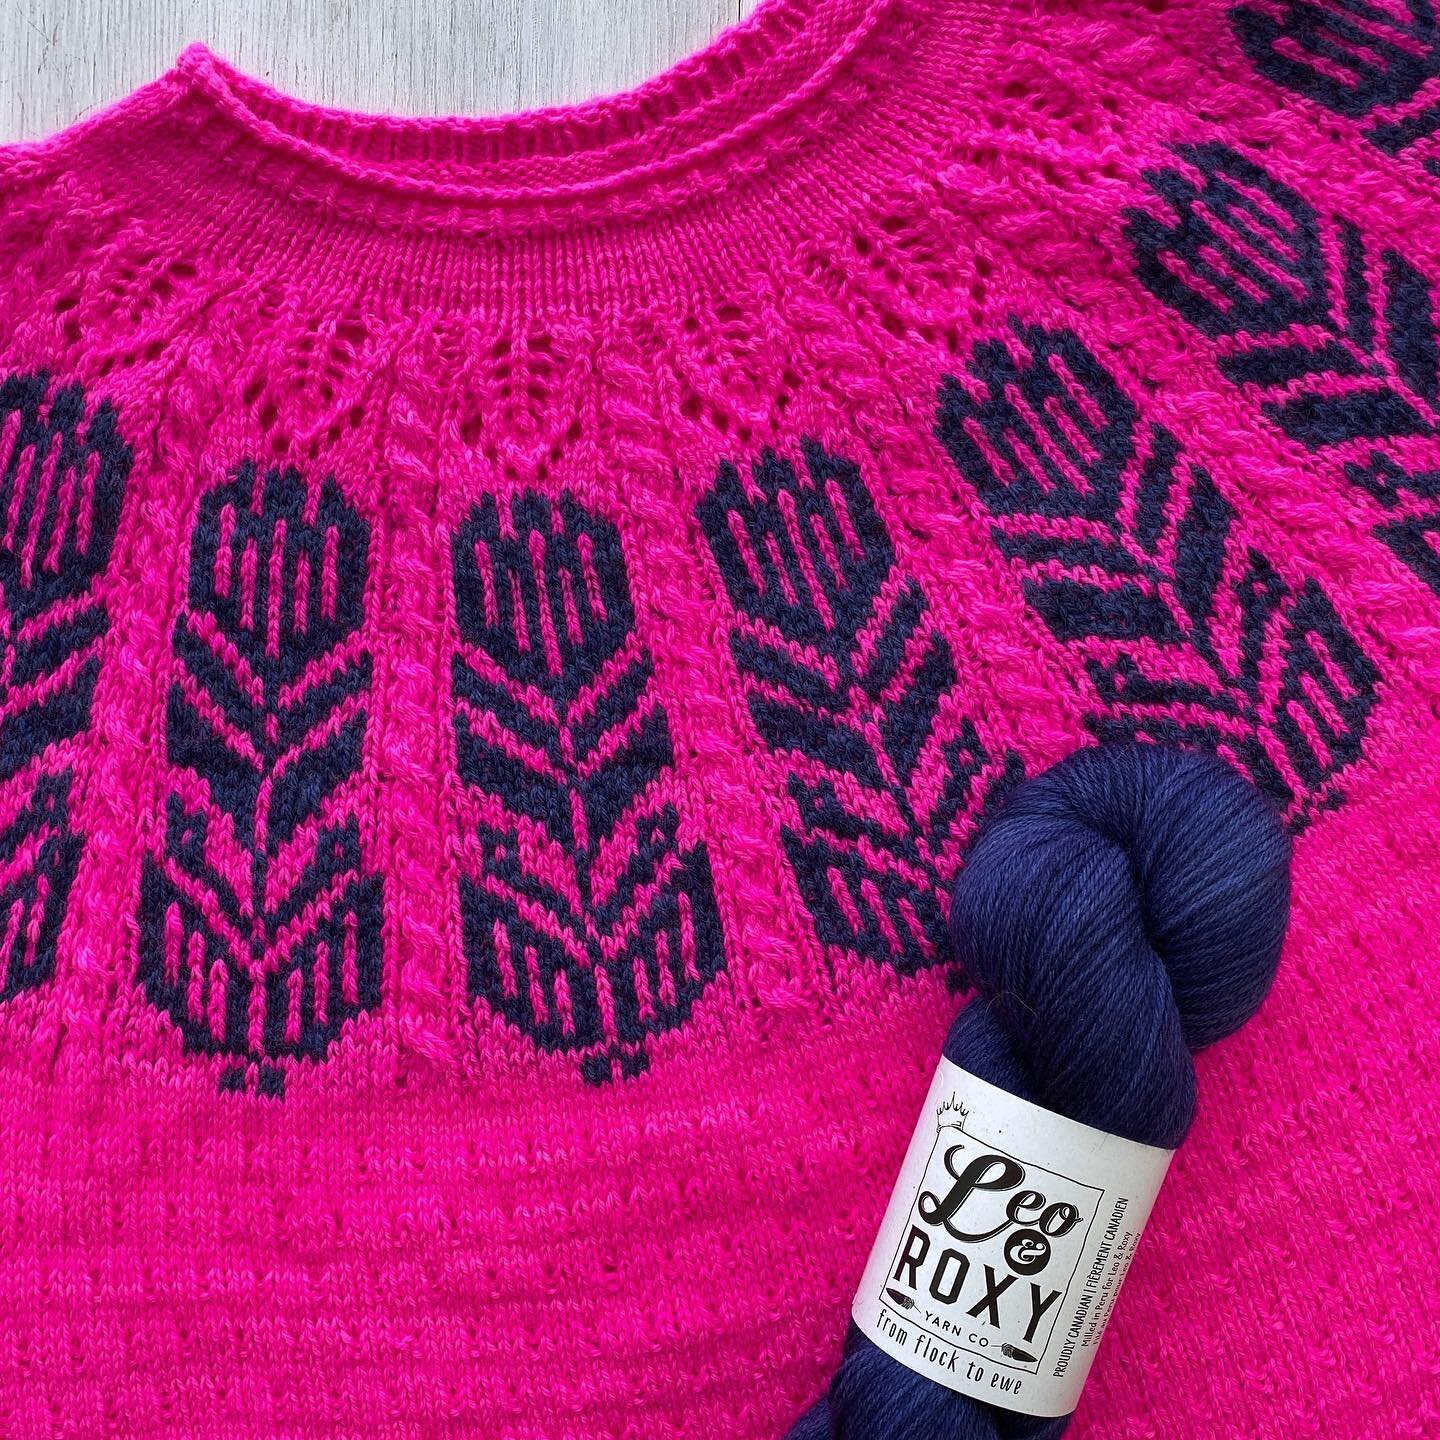 I think everyone should have a sweater made with Pink Flamenco! 

Pattern: Misurina @boylandknitworks 
Yarn: Natural Sock in Pink Flamenco and King&rsquo;s Treasure
Kits: Yes! Available at Knit City Montreal this weekend. 

#leoandroxyyarnco #colourf